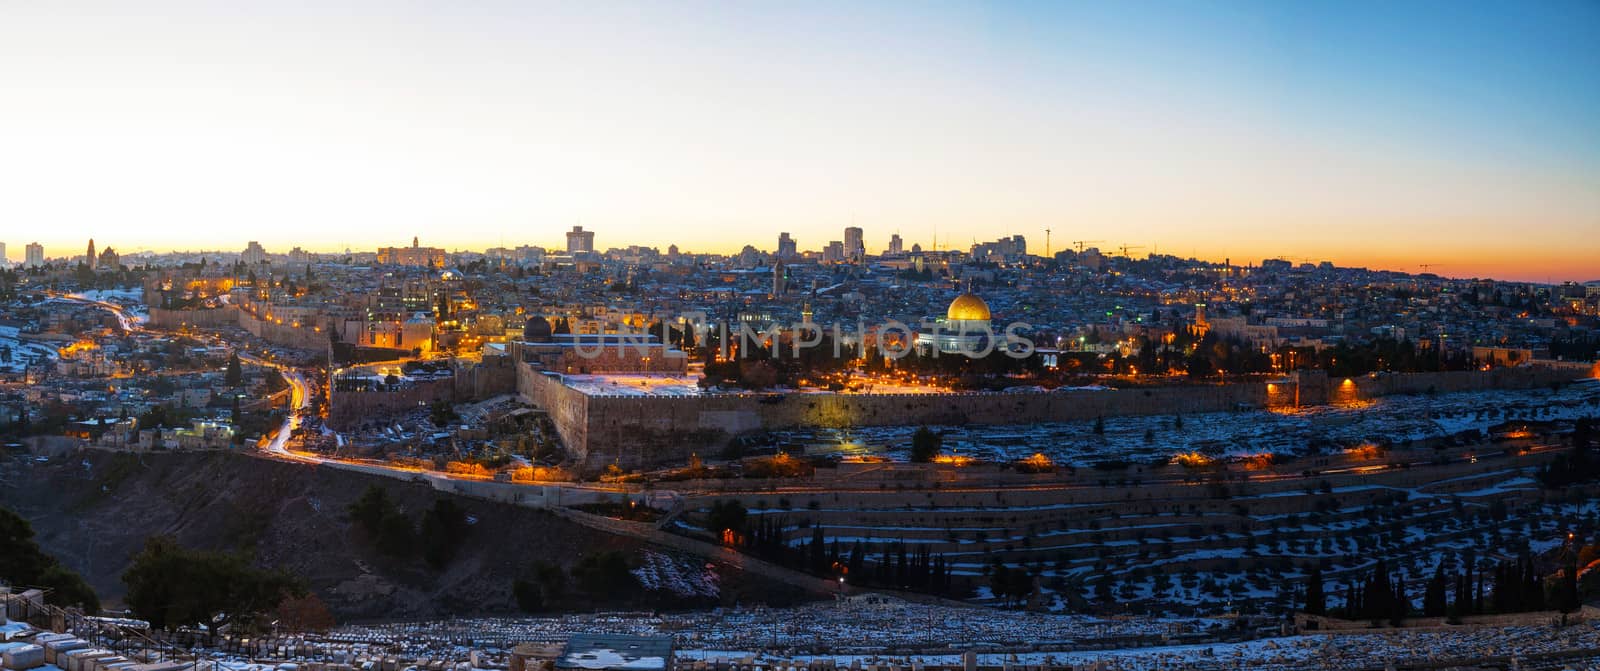 Overview of Old City in Jerusalem, Israel with The Dome of the Rock Mosque